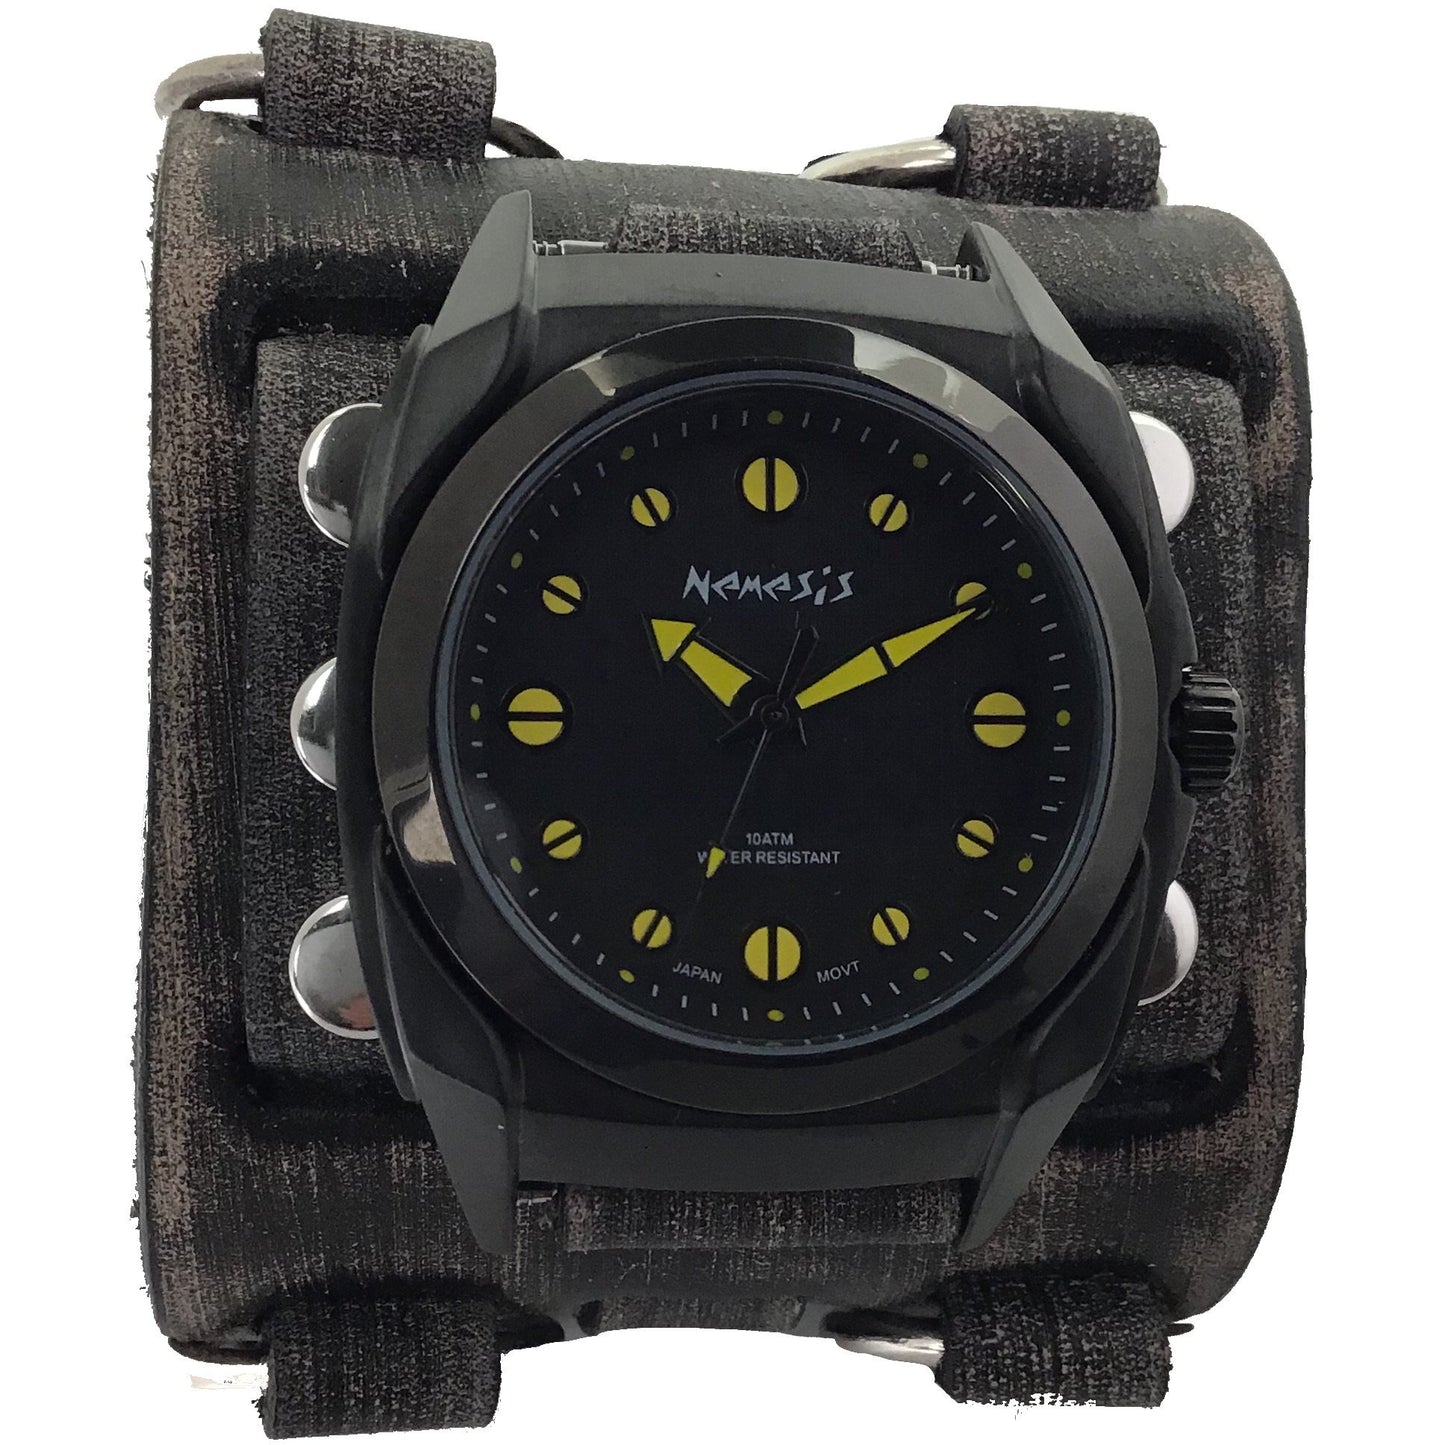 Eternity Black/Yellow Watch with Distressed Black Leather Triple Strap Cuff